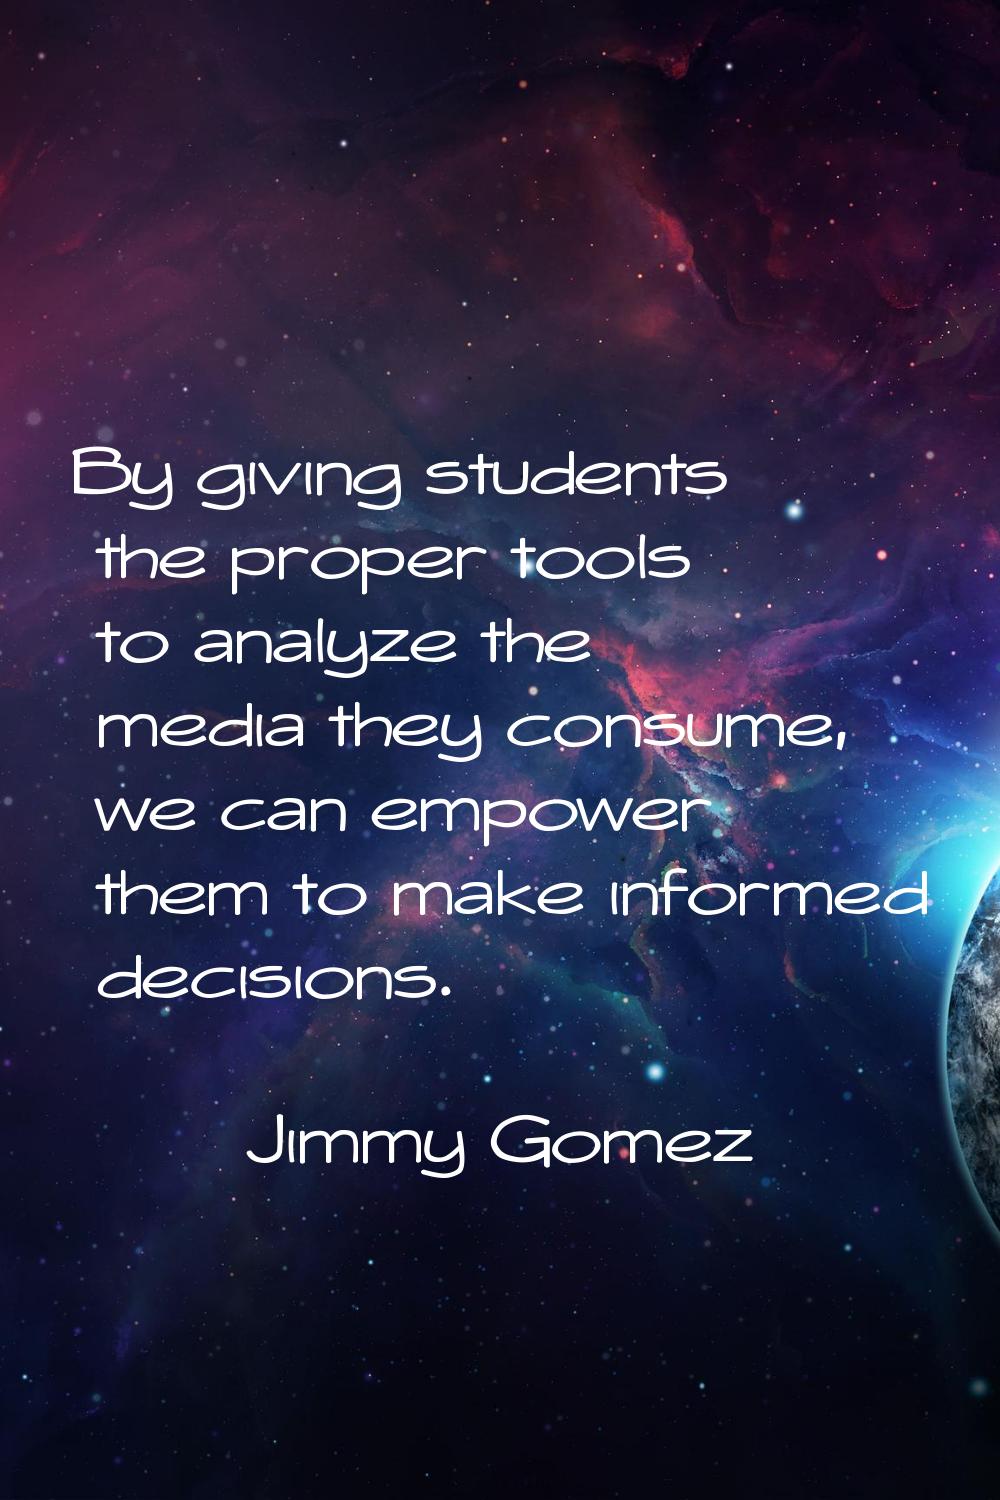 By giving students the proper tools to analyze the media they consume, we can empower them to make 